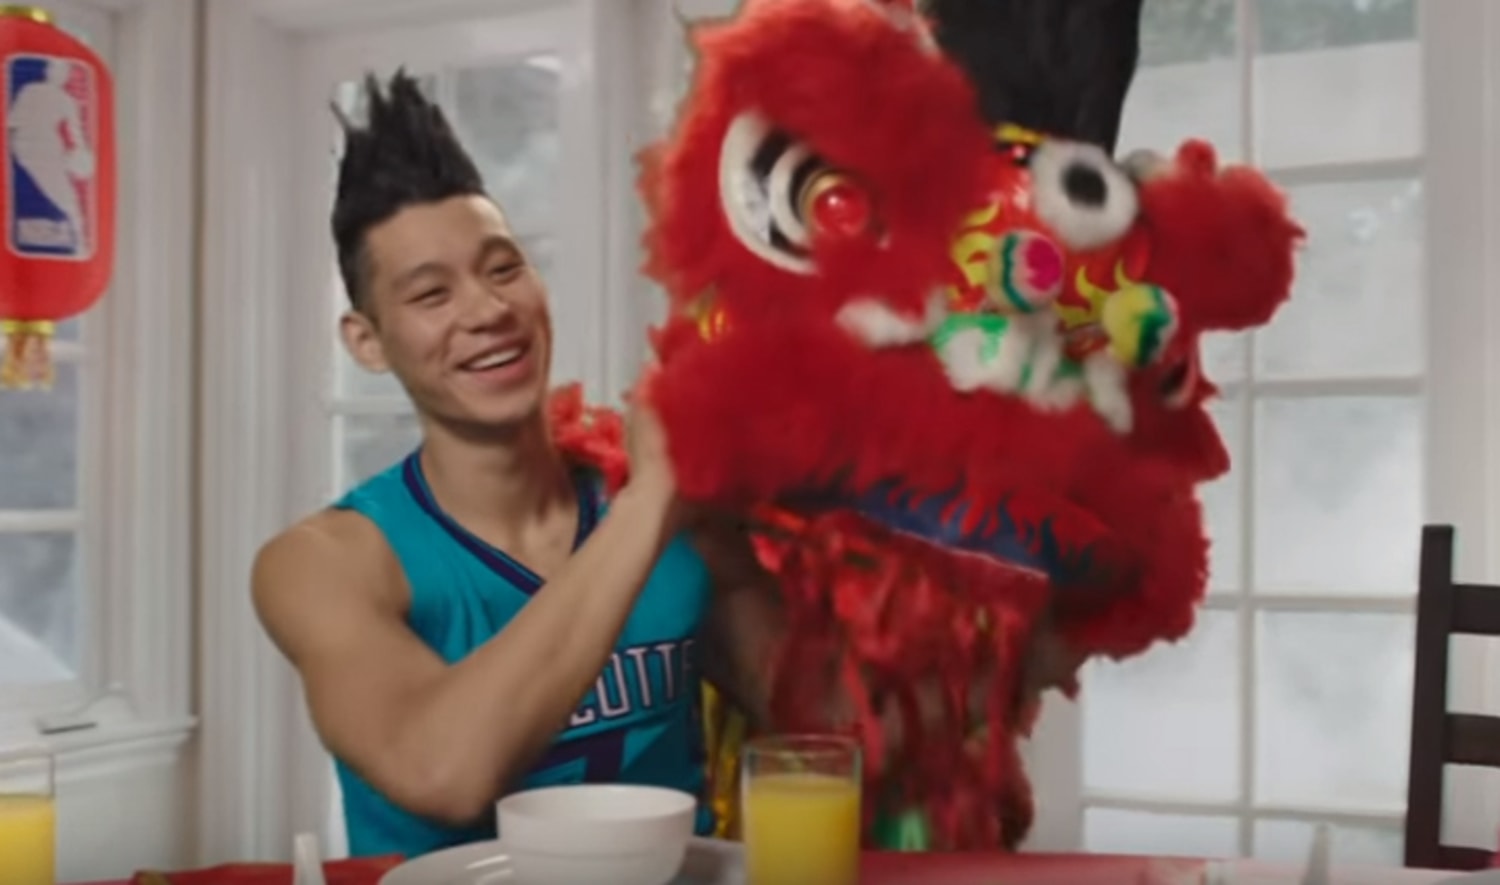 Warriors unveil Chinese New Year jerseys (PHOTOS) - NBC Sports